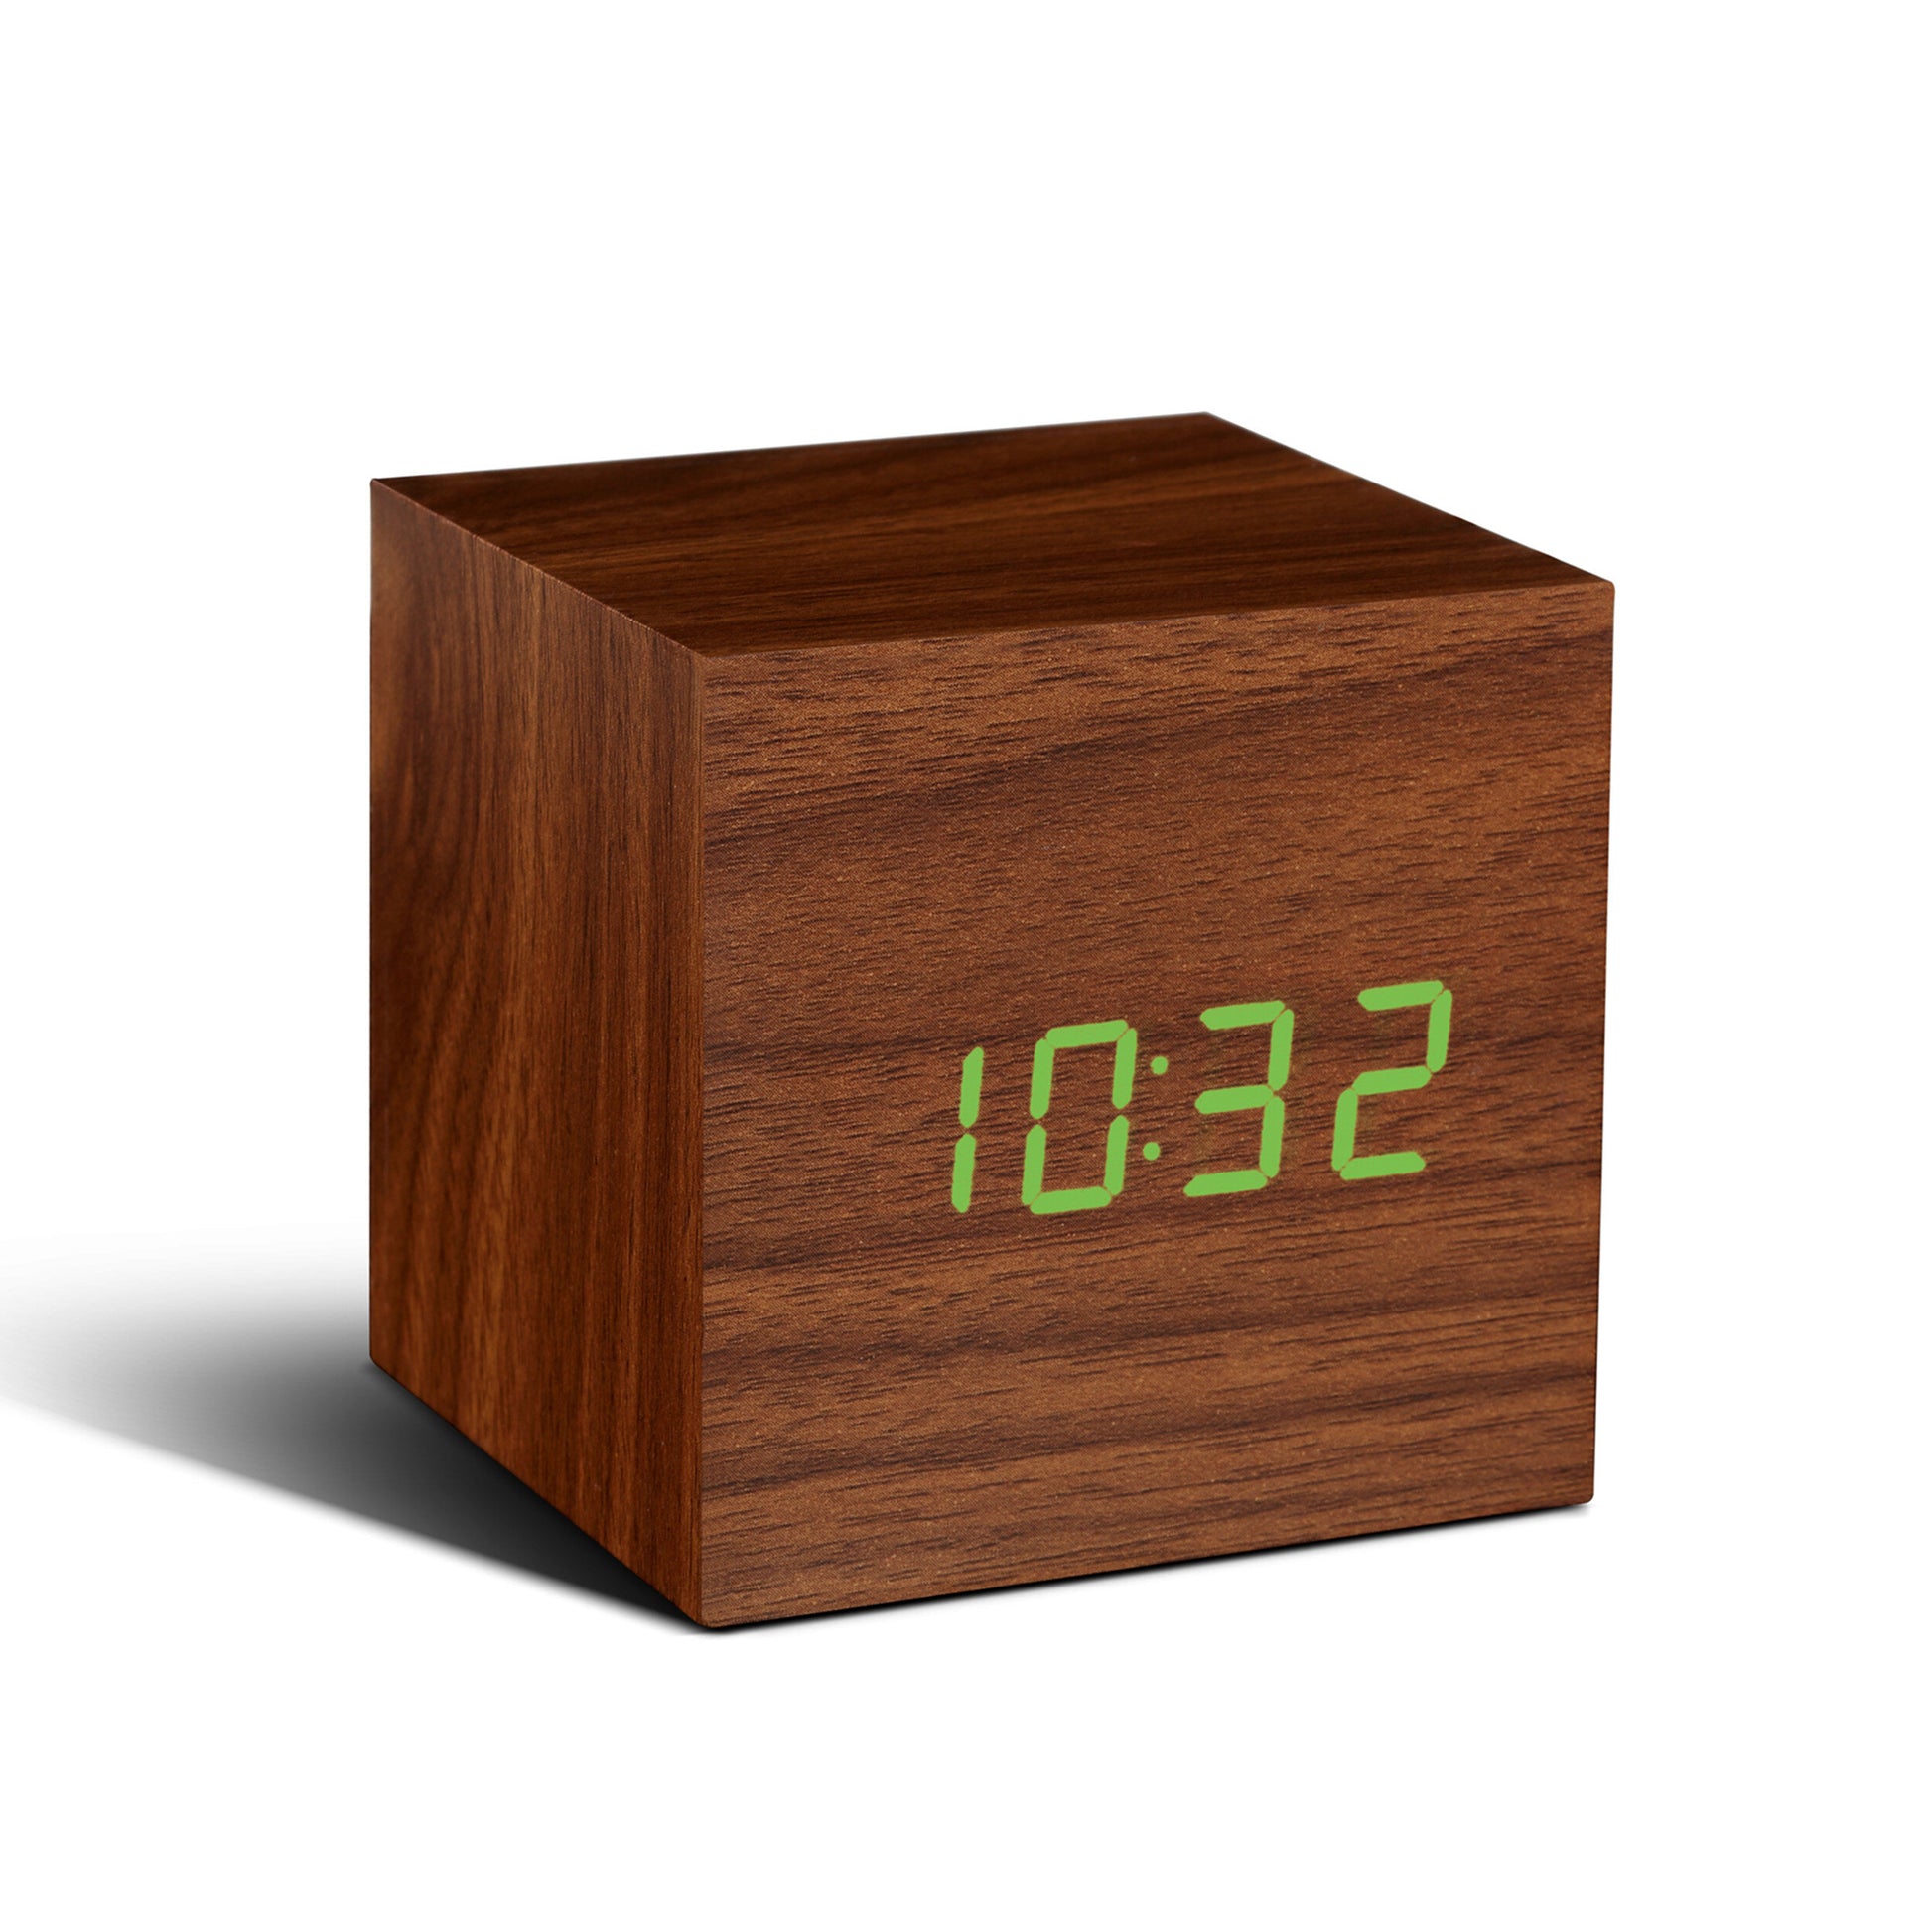 Cube Click Clock in Walnut Finish with Green Digits